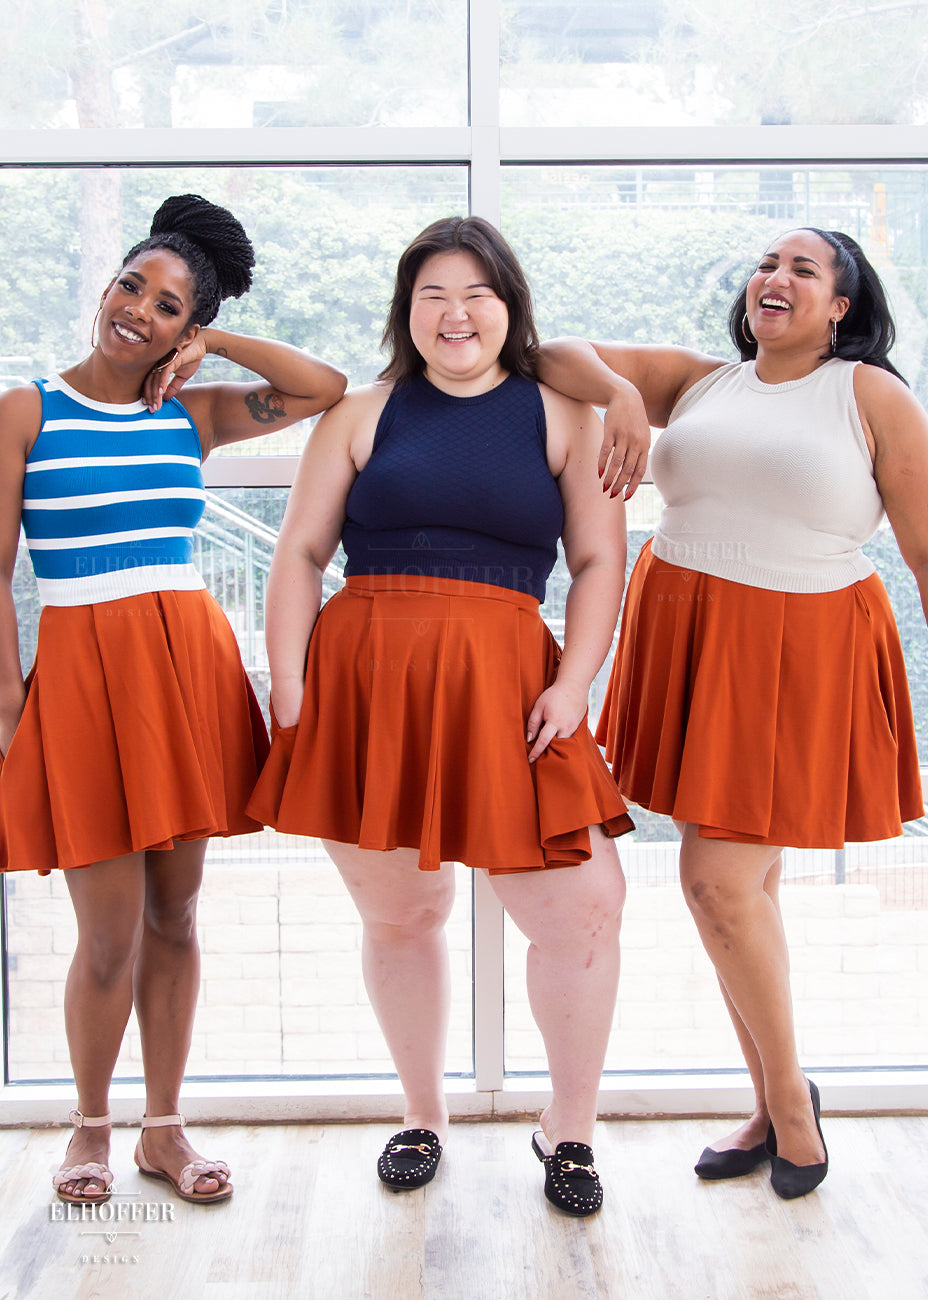 Krystina, Ashley, and Tas model the rust orange skater skirt paired with different high neck, sleeveless crop tops.